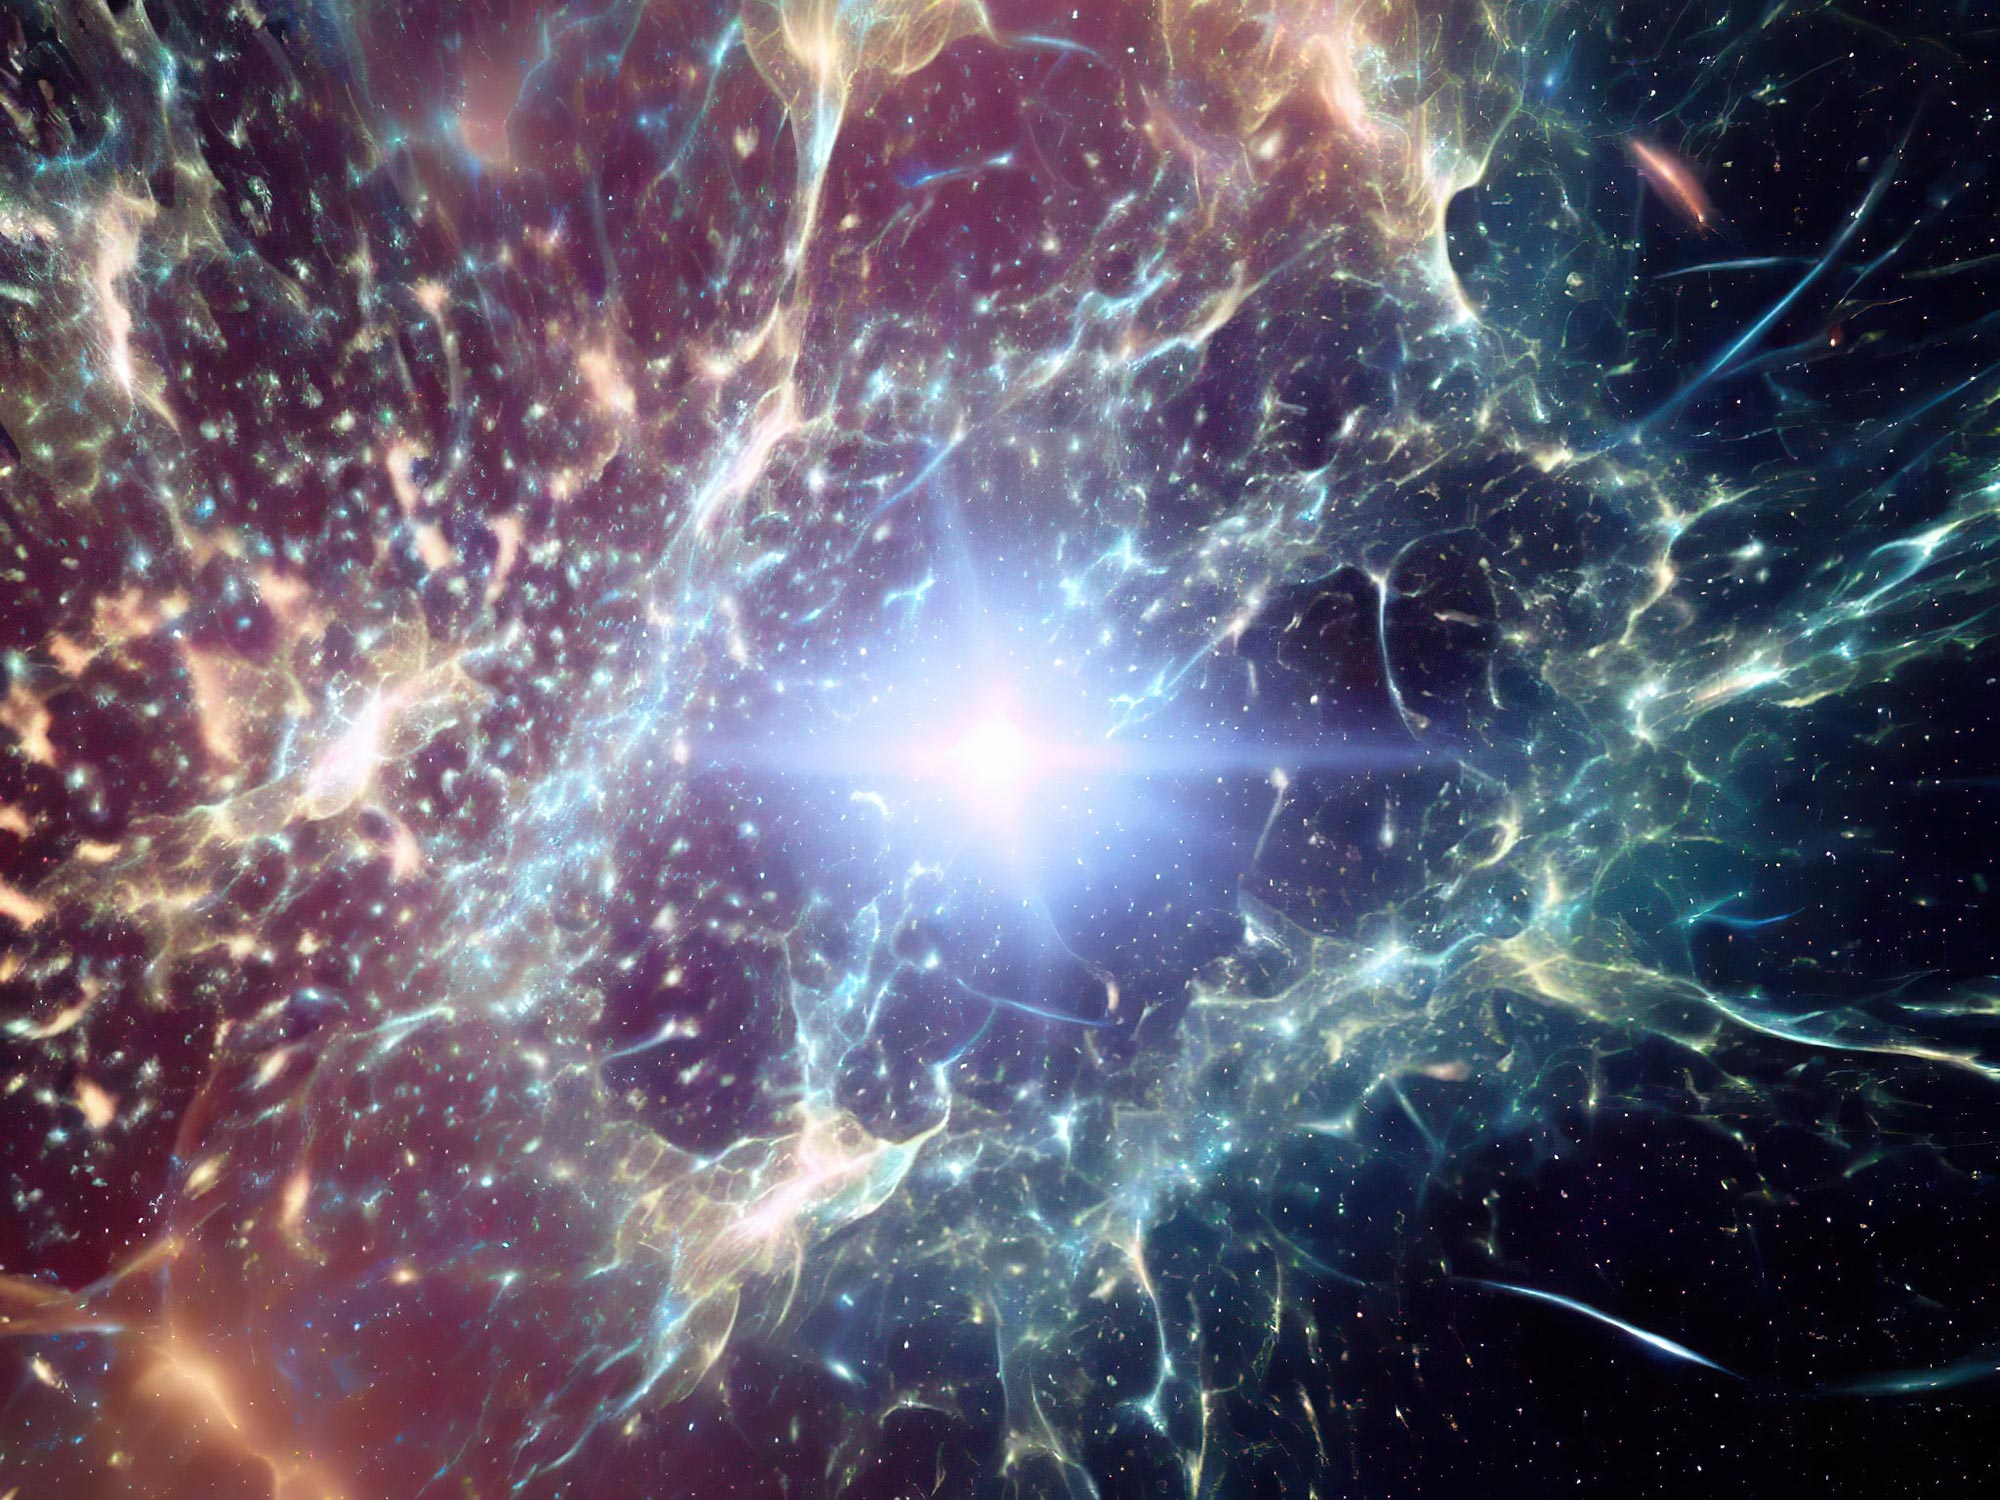 The Webb Space Telescope shows the early universe cracked with bursts of star formation